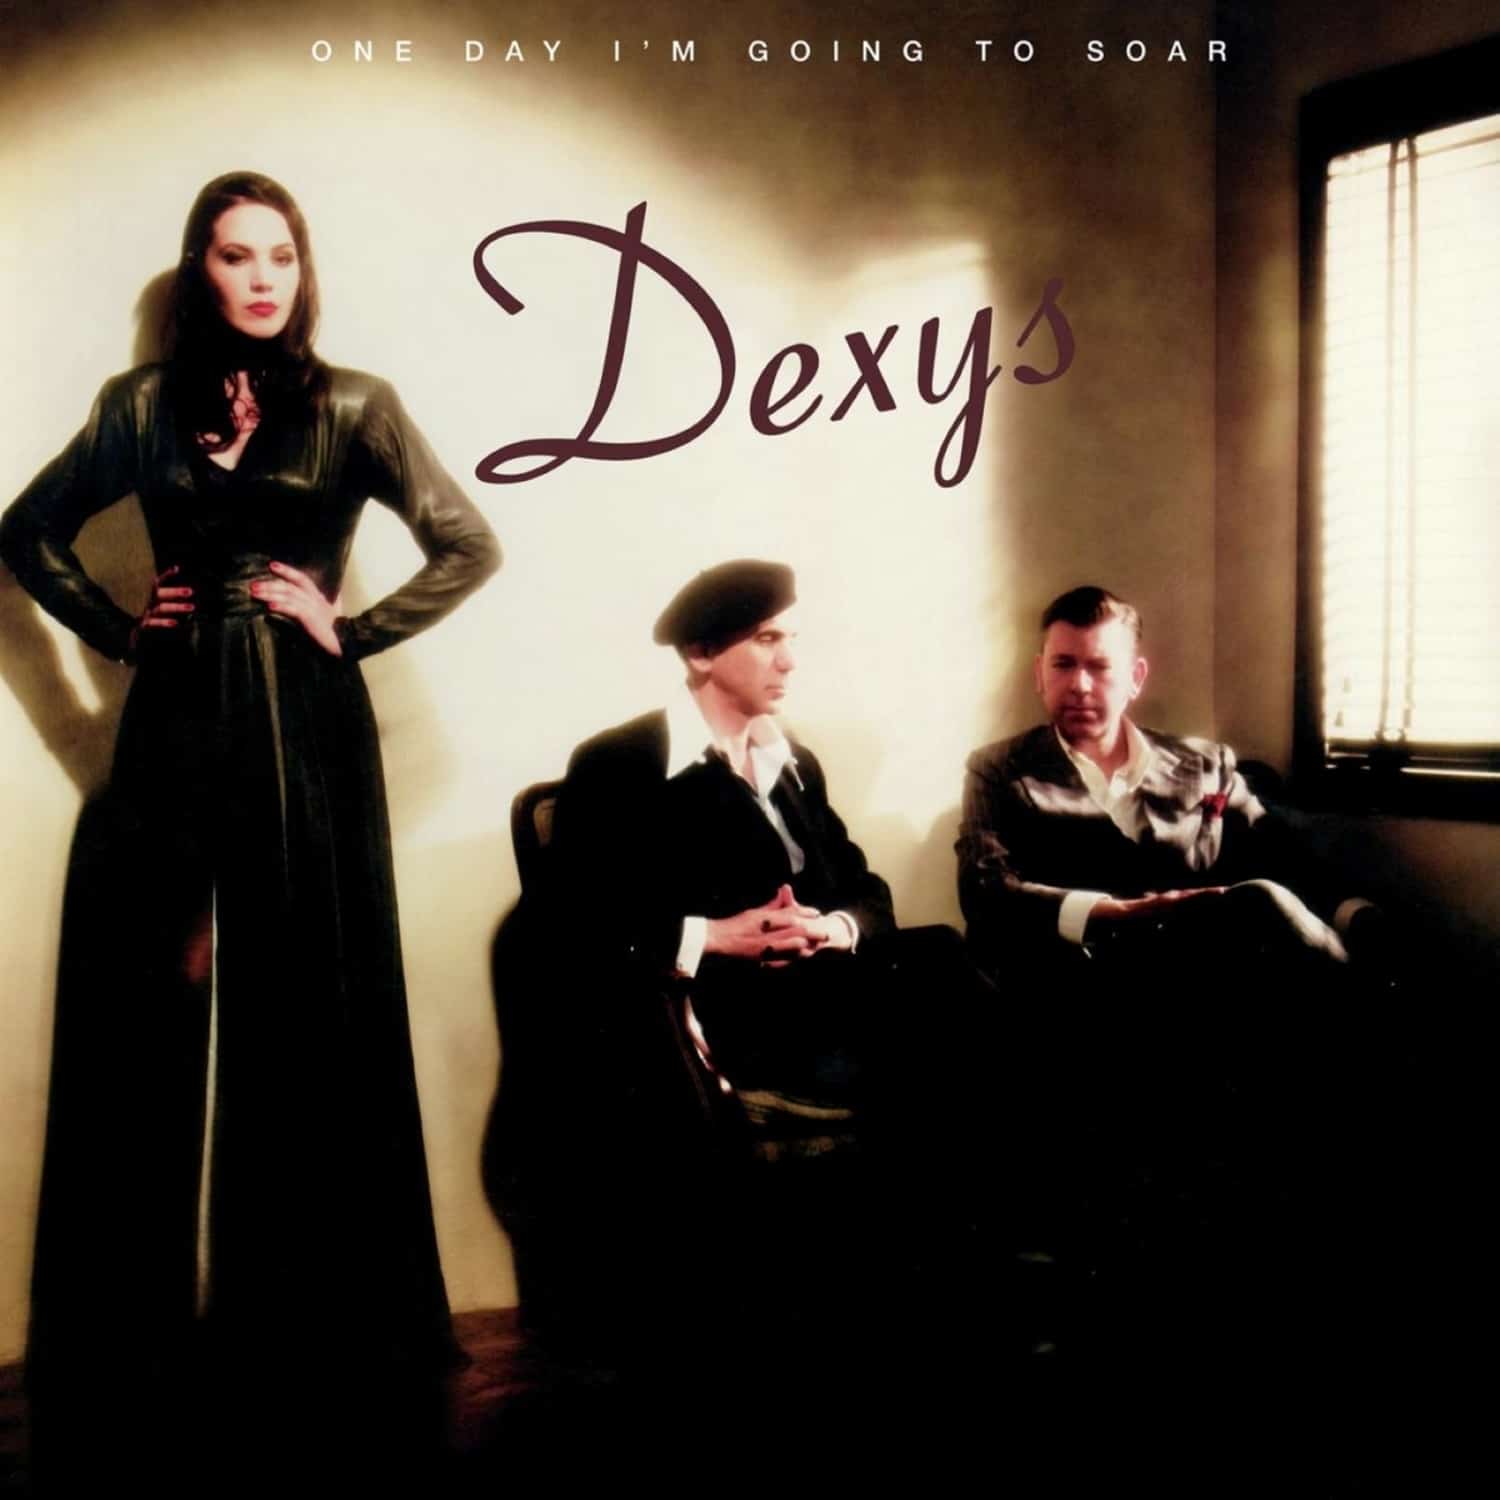 Dexys - ONE DAY I M GOING TO SOAR 